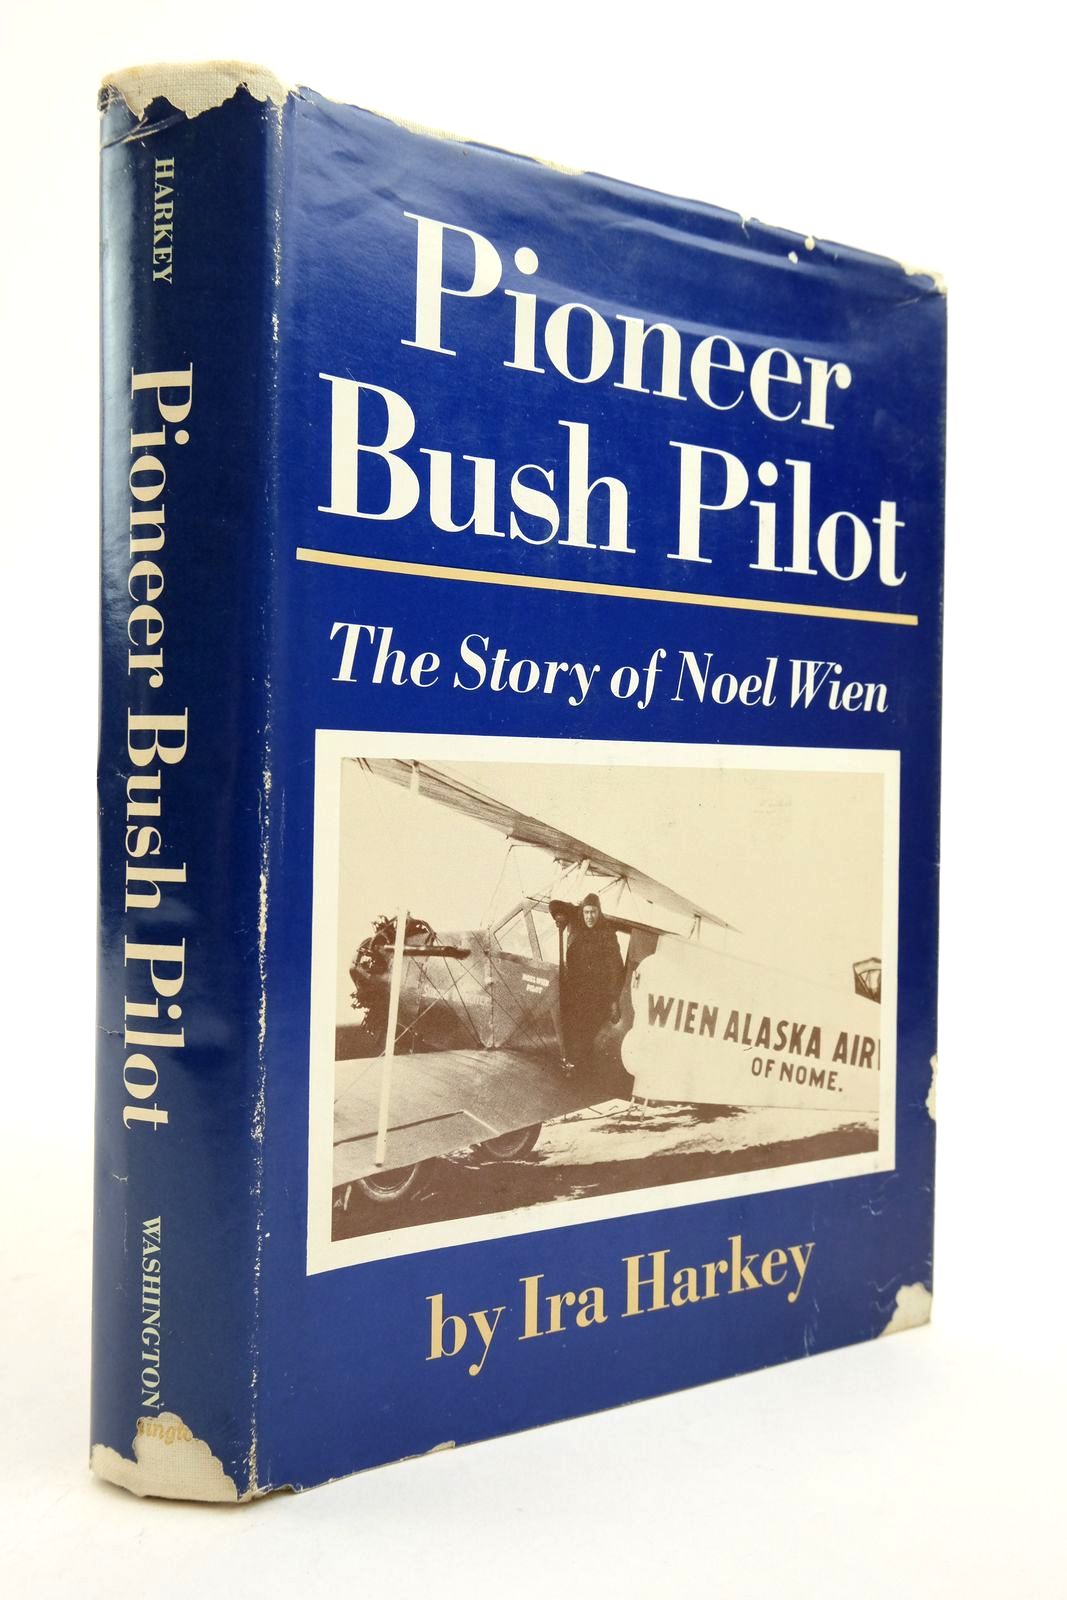 Photo of PIONEER BUSH PILOT: THE STORY OF NOEL WIEN written by Harkey, Ira published by University of Washington Press (STOCK CODE: 2139209)  for sale by Stella & Rose's Books